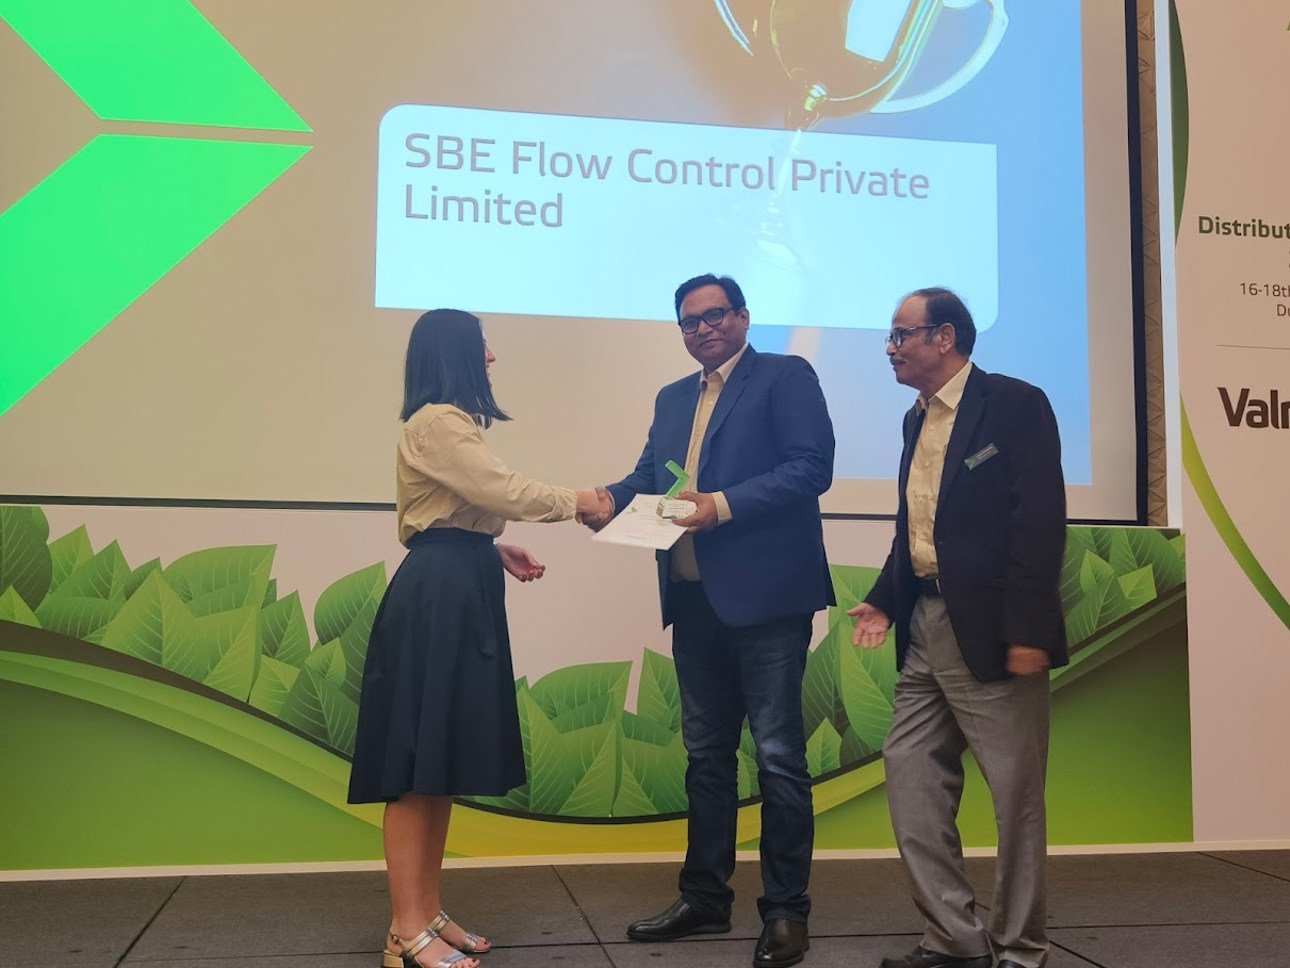 SBE Flow Control awarded at Distributor Days India